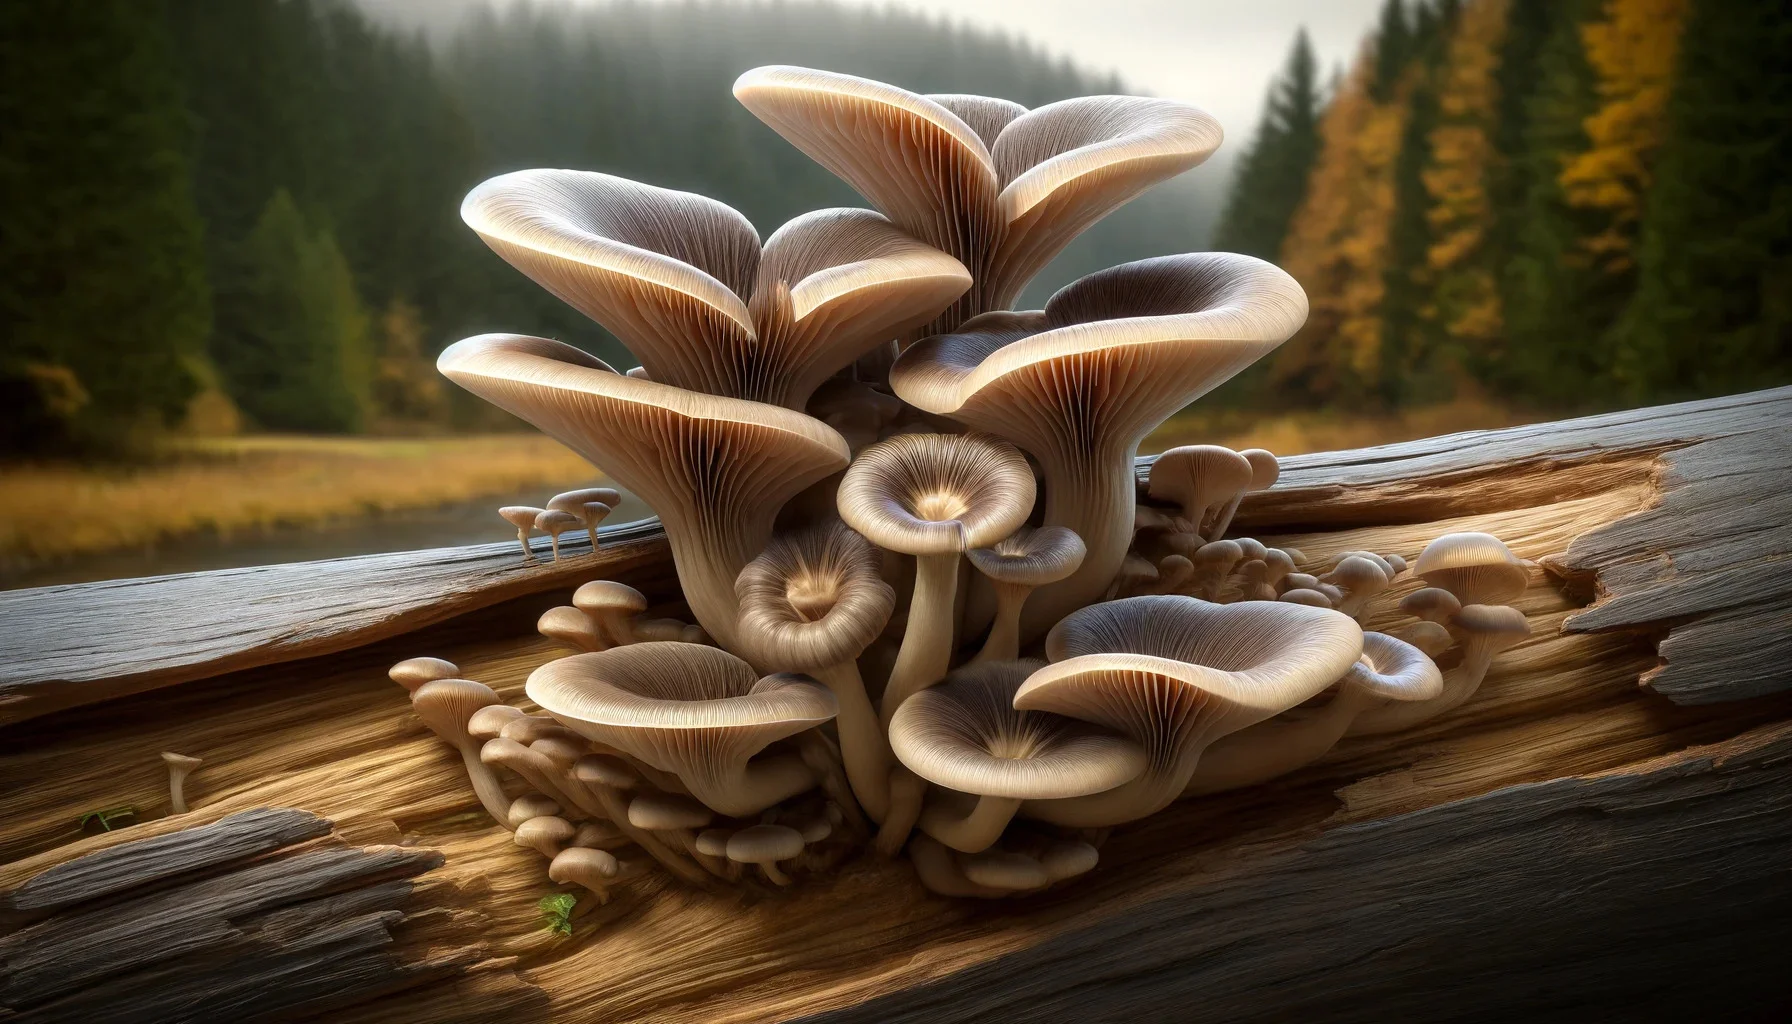 A photorealistic image of oyster mushrooms growing from a log in a landscape format. 